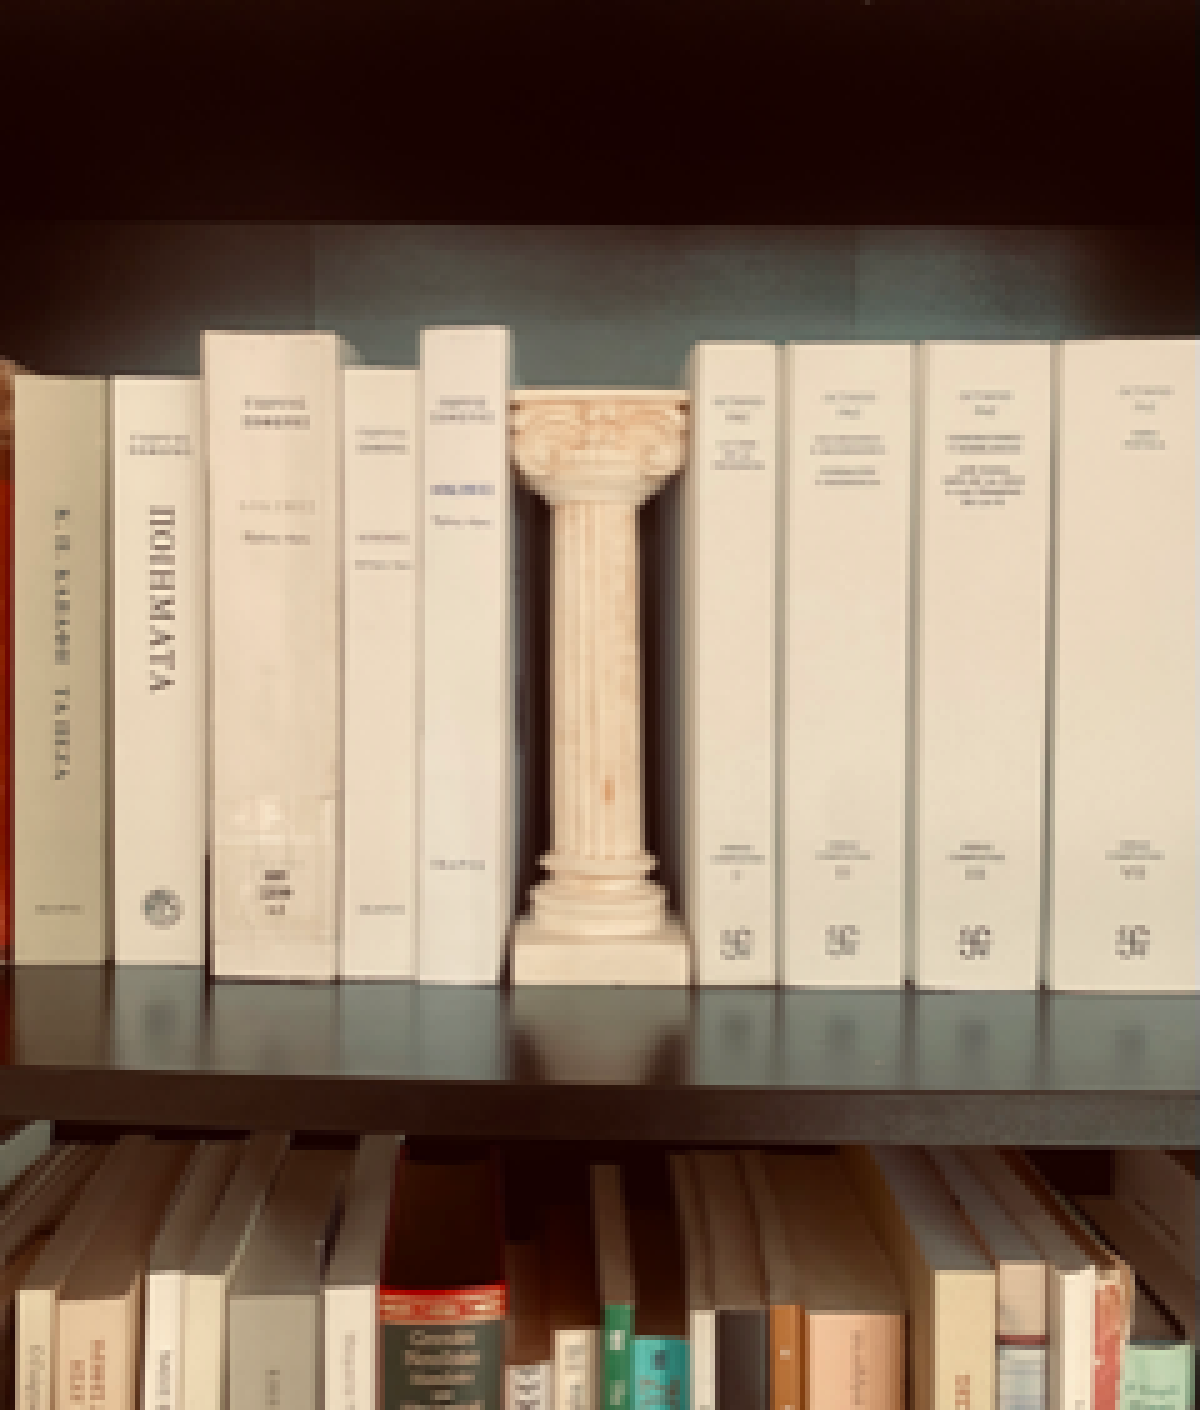 A replica of a doric column placed between stacked books